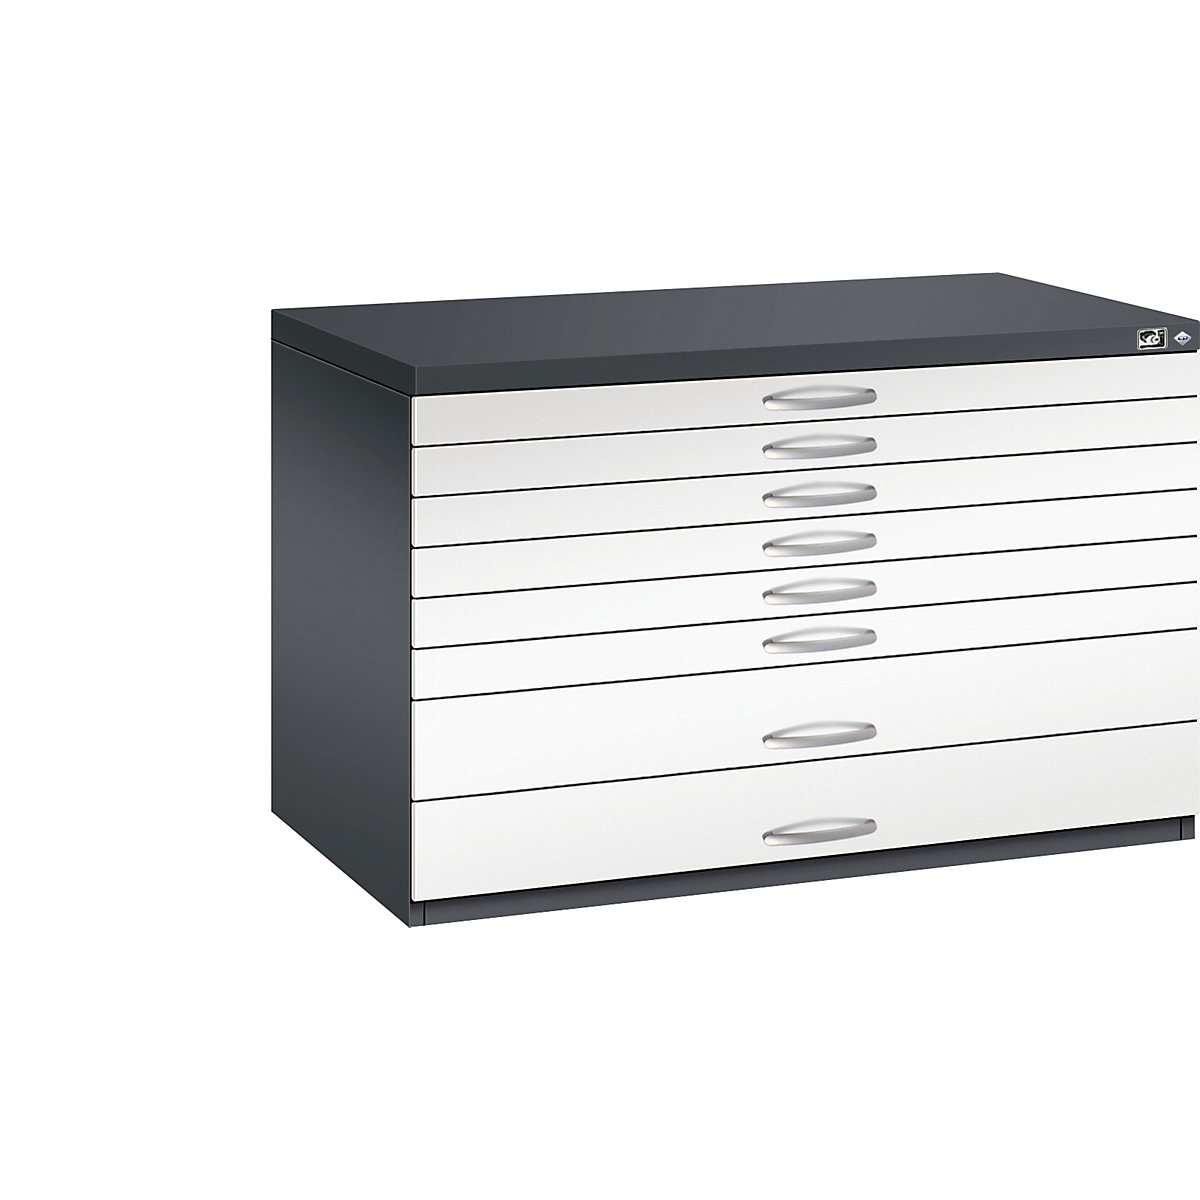 Drawing cabinet – C+P, A1, 8 drawers, height 760 mm, black grey / traffic white-22